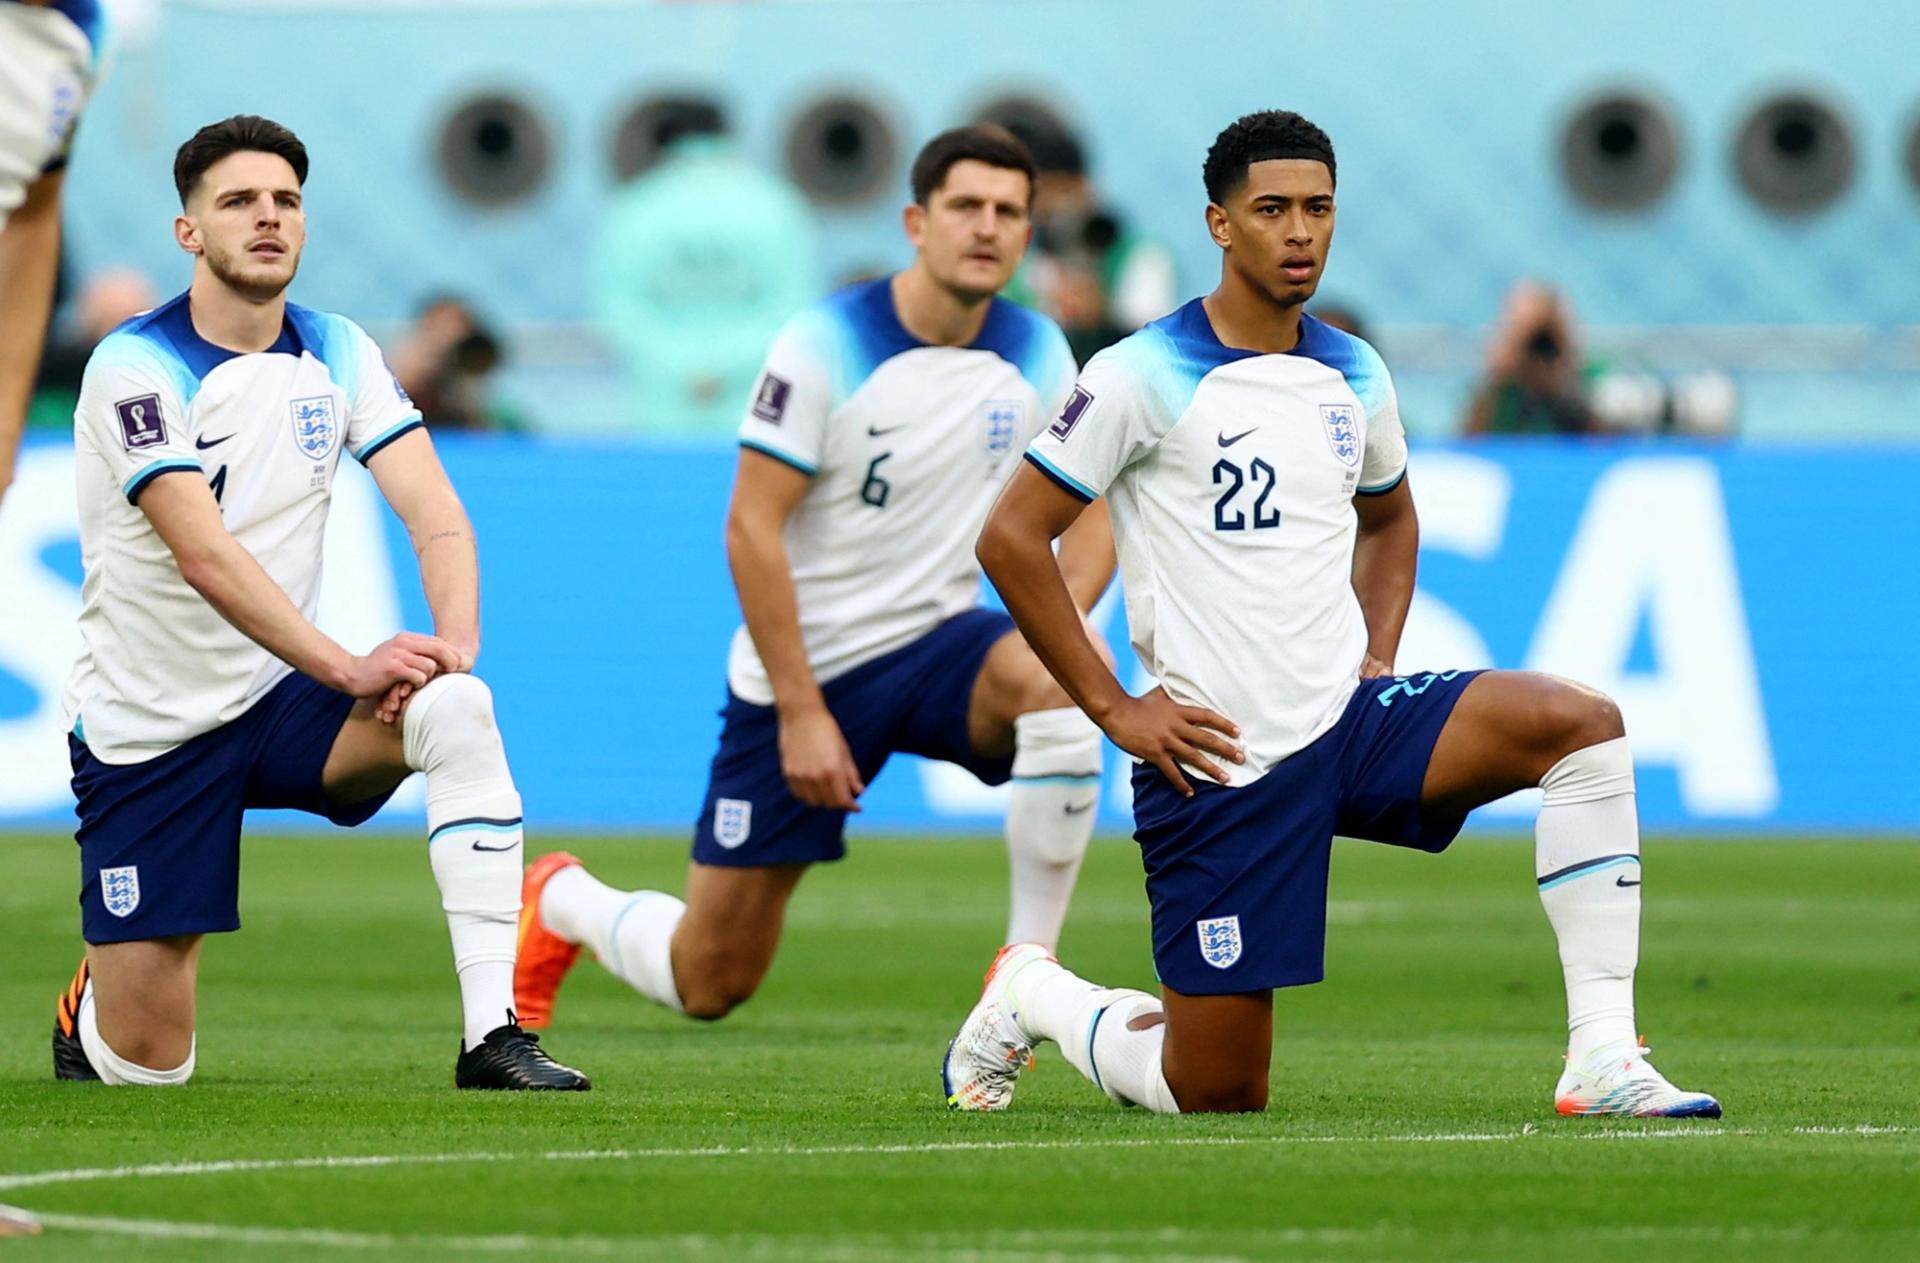  England's players take the knee before their match against Iran